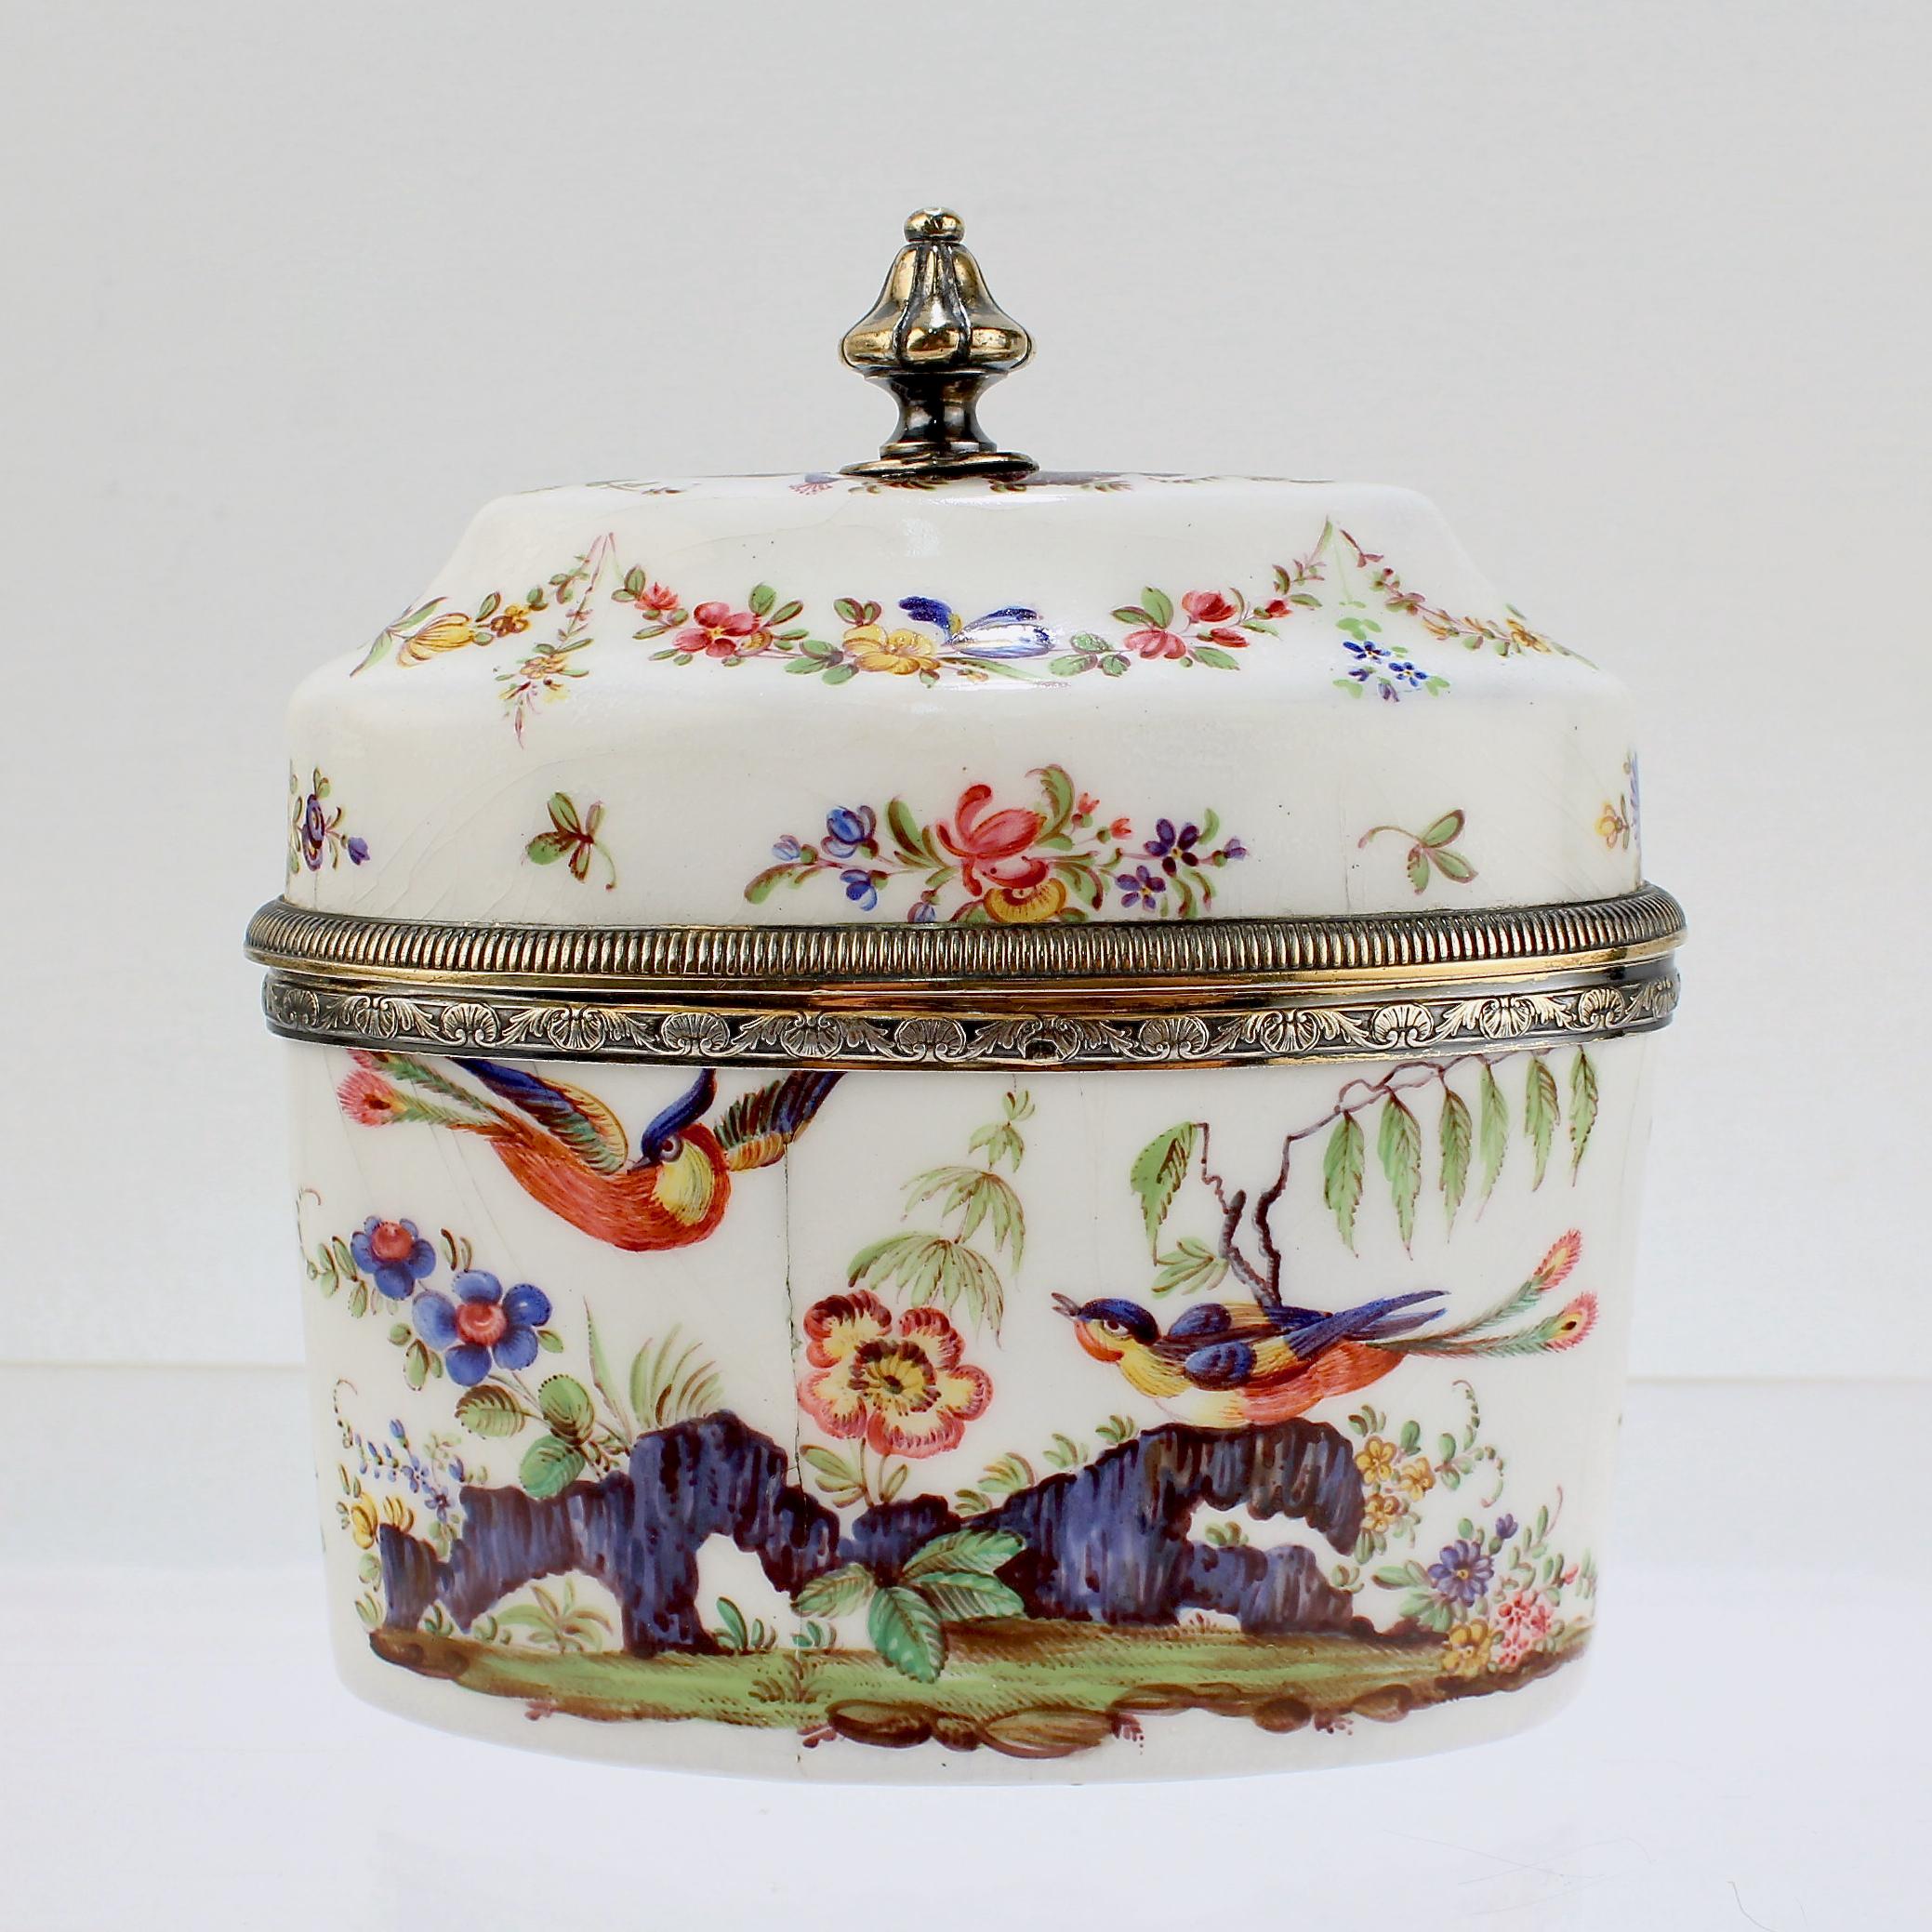 A fine antique French enamel tea caddy.

Mounted with gilt silver mounts.

By Risler of Paris.

Decorated with polychrome birds or paradise, rock outcroppings, and flowers/floral swags throughout. 

Simply a wonderful early tea caddy!